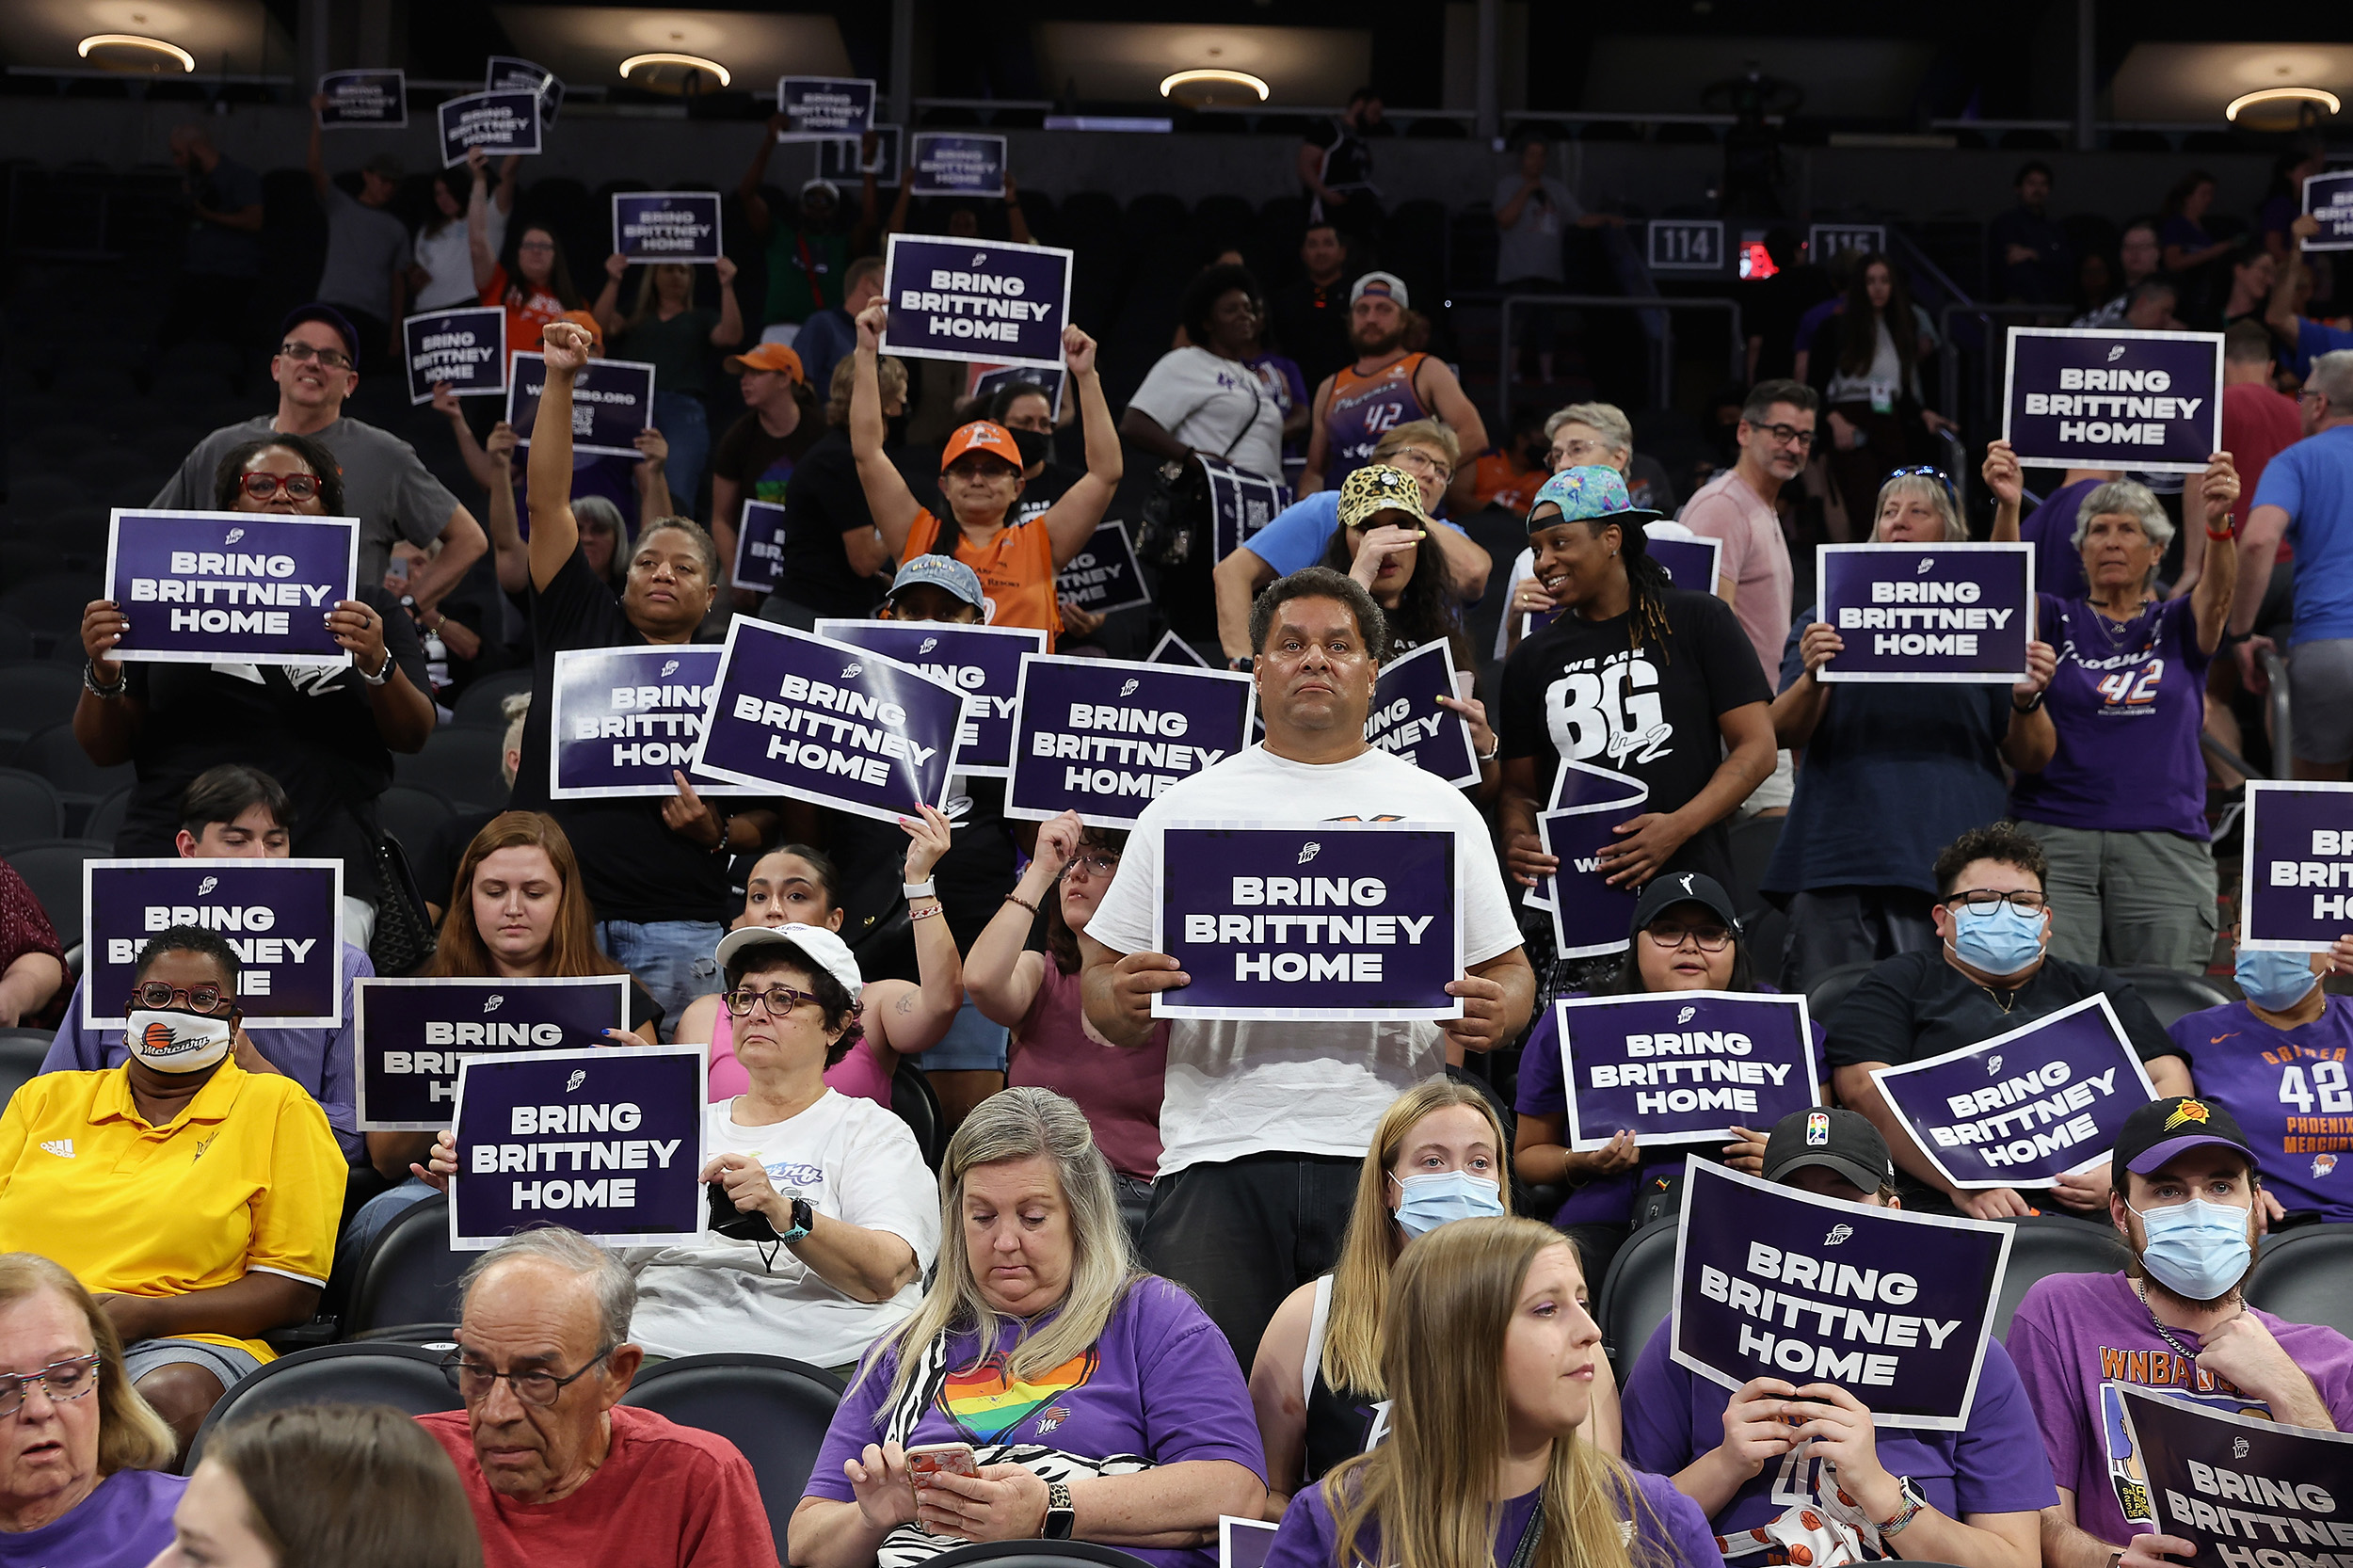 Supporters hold up signs reading "Bring Brittney Home" during a rally to support the release of detained basketball star Brittney Griner at Footprint Center on July 6, in Phoenix, Arizona. 